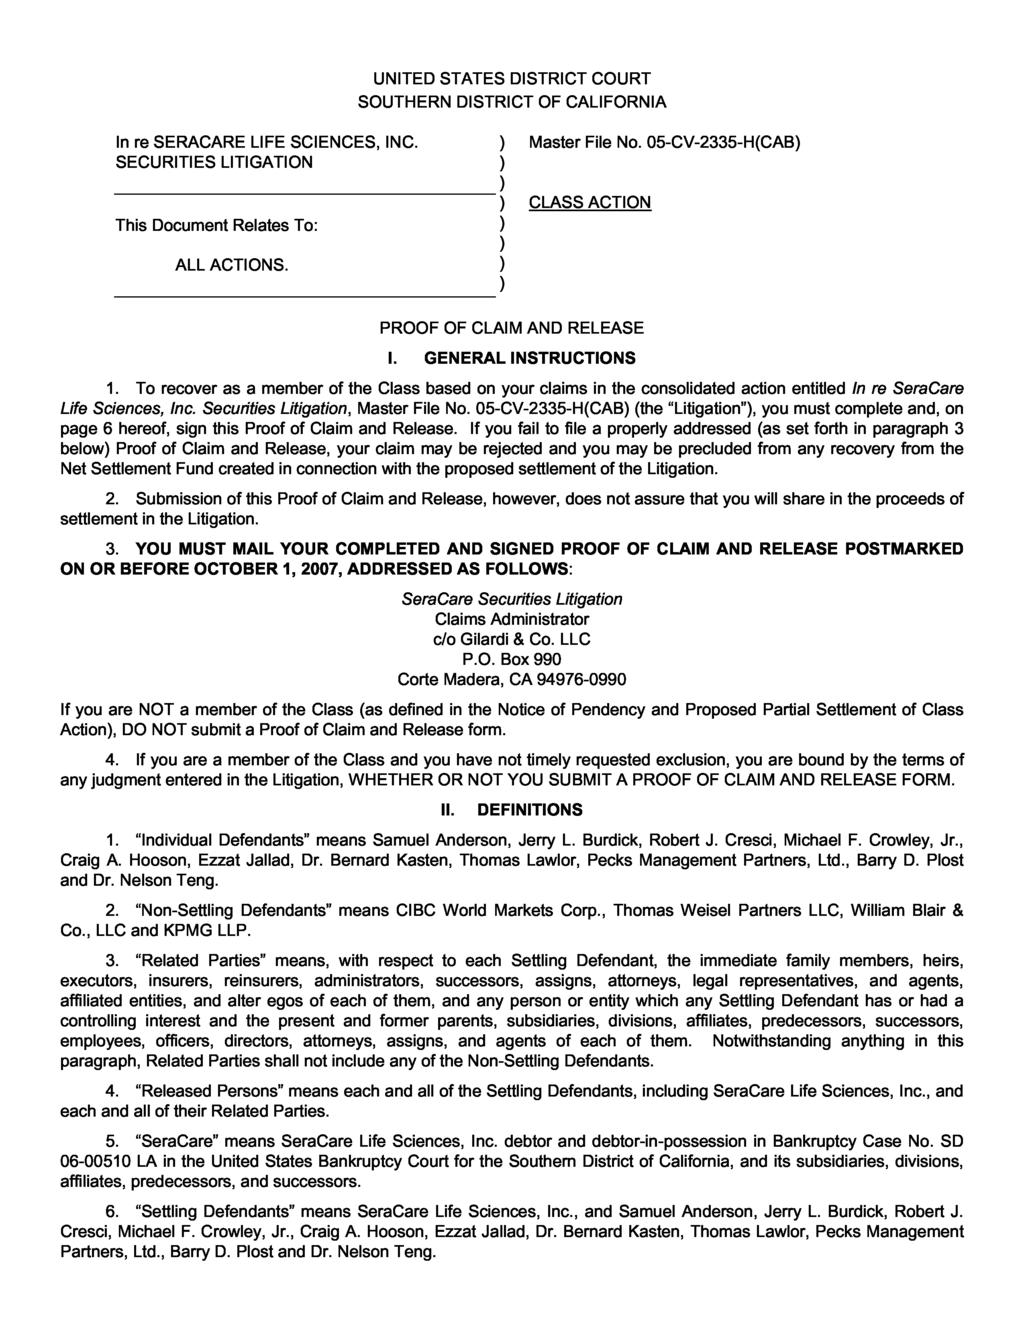 UNITED STATES DISTRICT COURT SOUTHERN DISTRICT OF CALIFORNIA In re SERACARE LIFE SCIENCES, INC. SECURITIES LITIGATI This Document Relates To: Master File No. 05-CV-2335-H(CAB) CLASS ACTI ALL ACTIS.